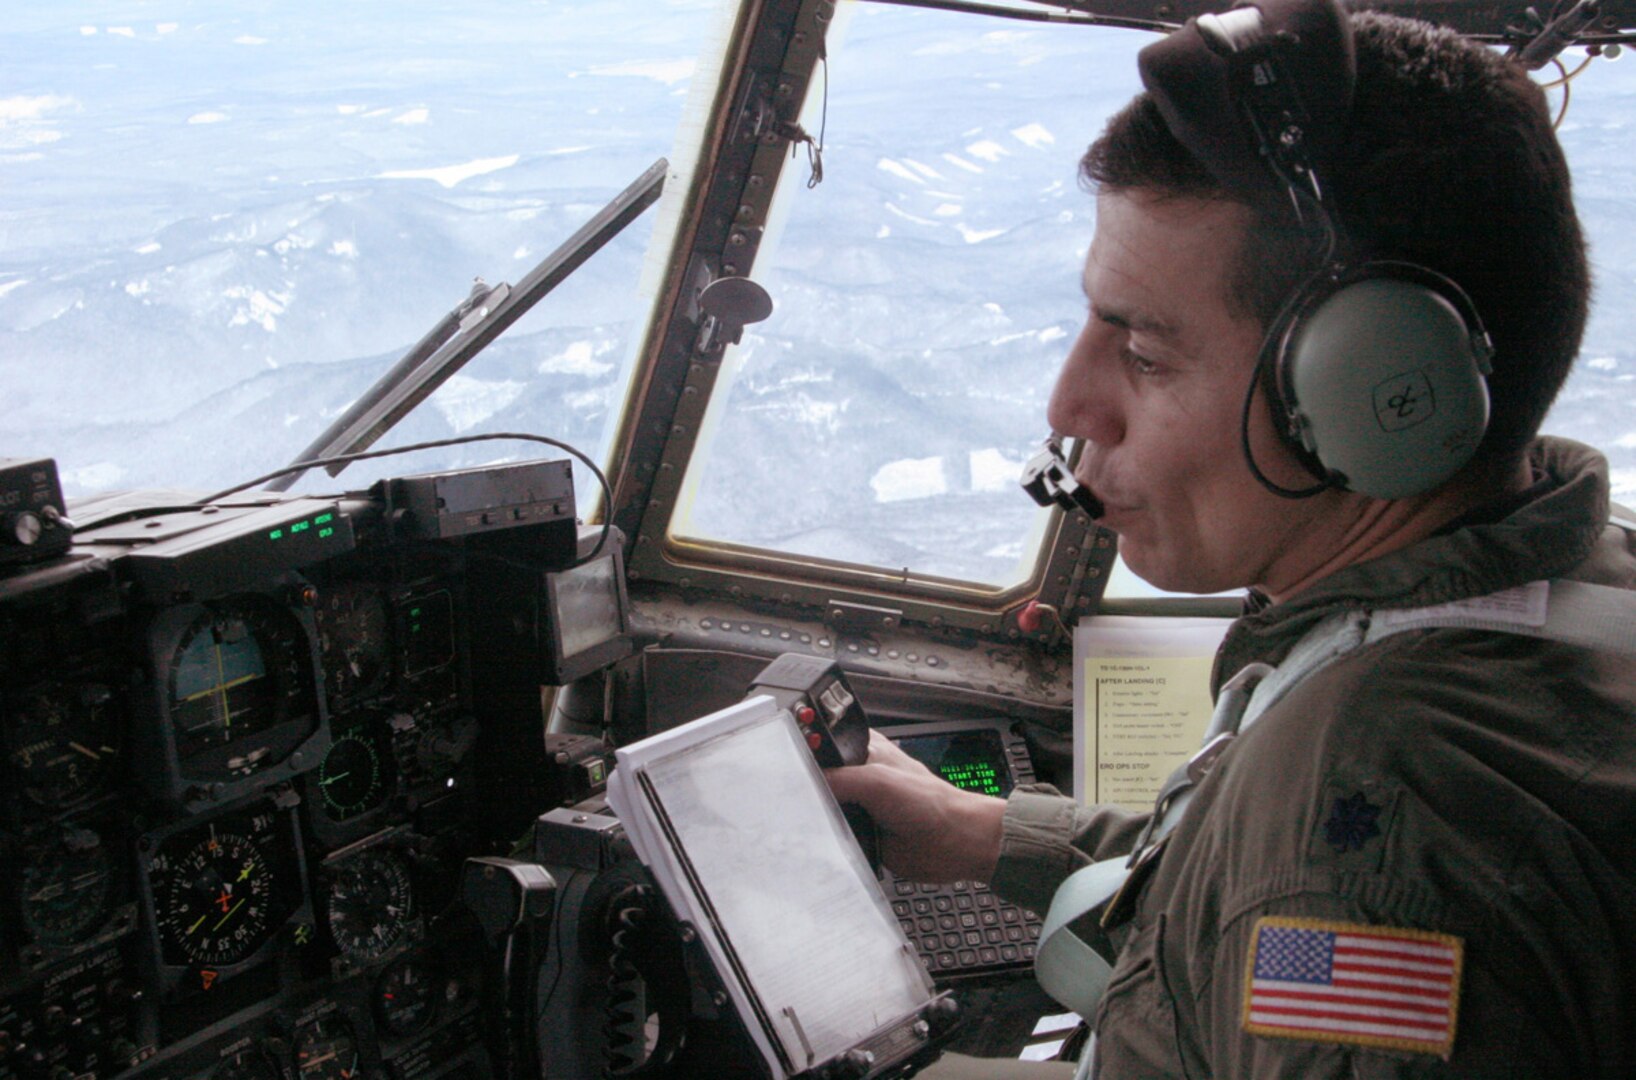 Lt. Col. Caesar Garduno receives coordinates while flying over Mt. Hood, Ore., Dec. 16. Colonel Garduno and his Air National Guard crew were joined by an Air Force Reserve pararescueman searching for three missing climbers. The colonel is a C-130 pilot from the 152nd Airlift Wing in Nevada.